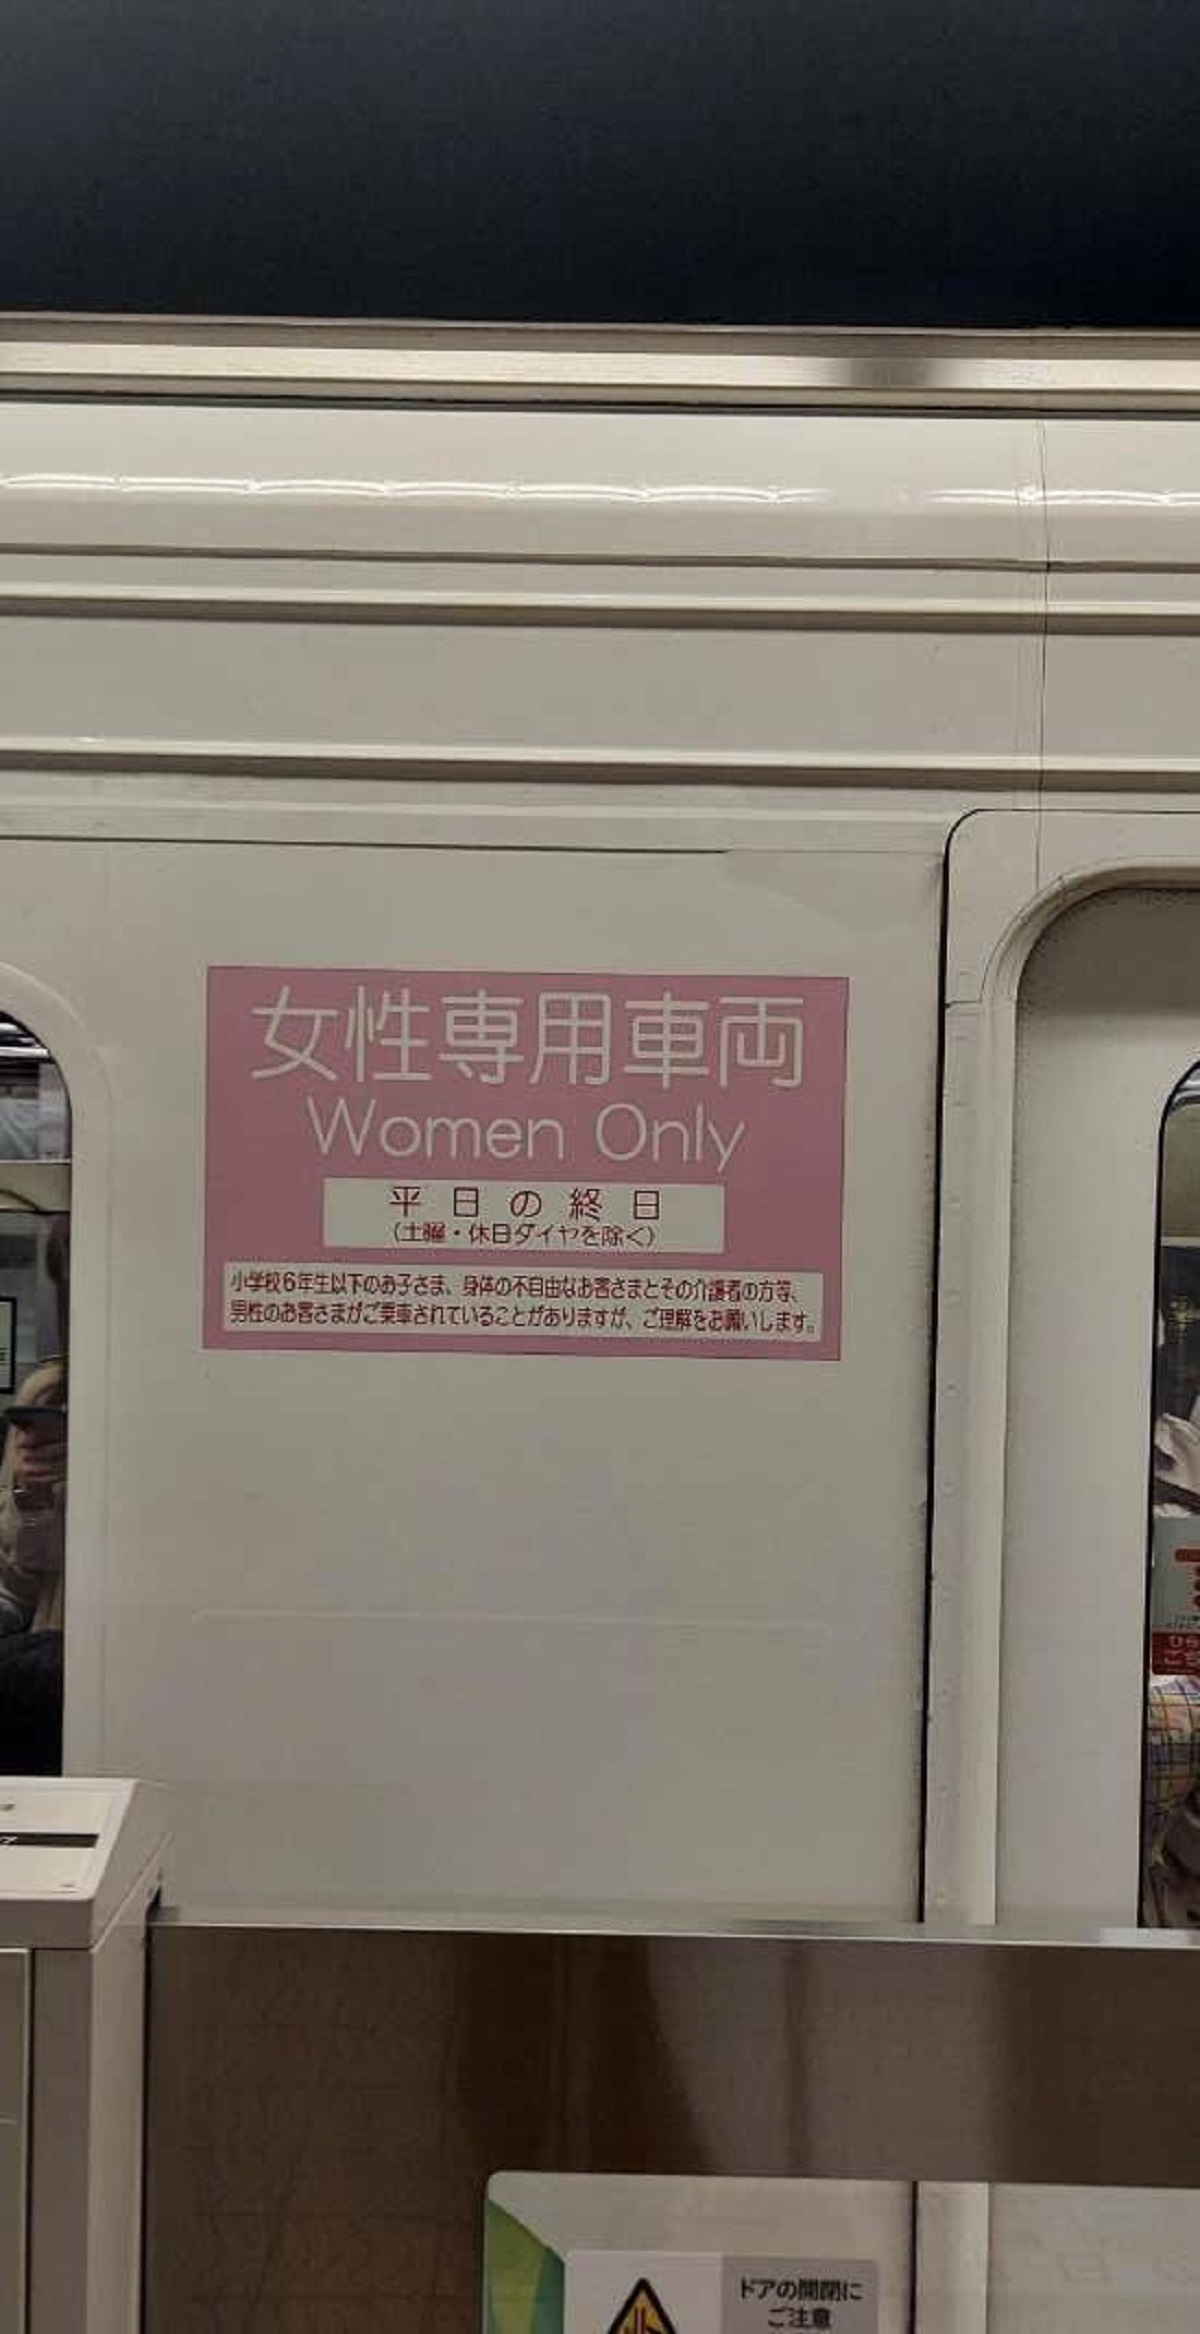 In Japan, there are women-only train cars.